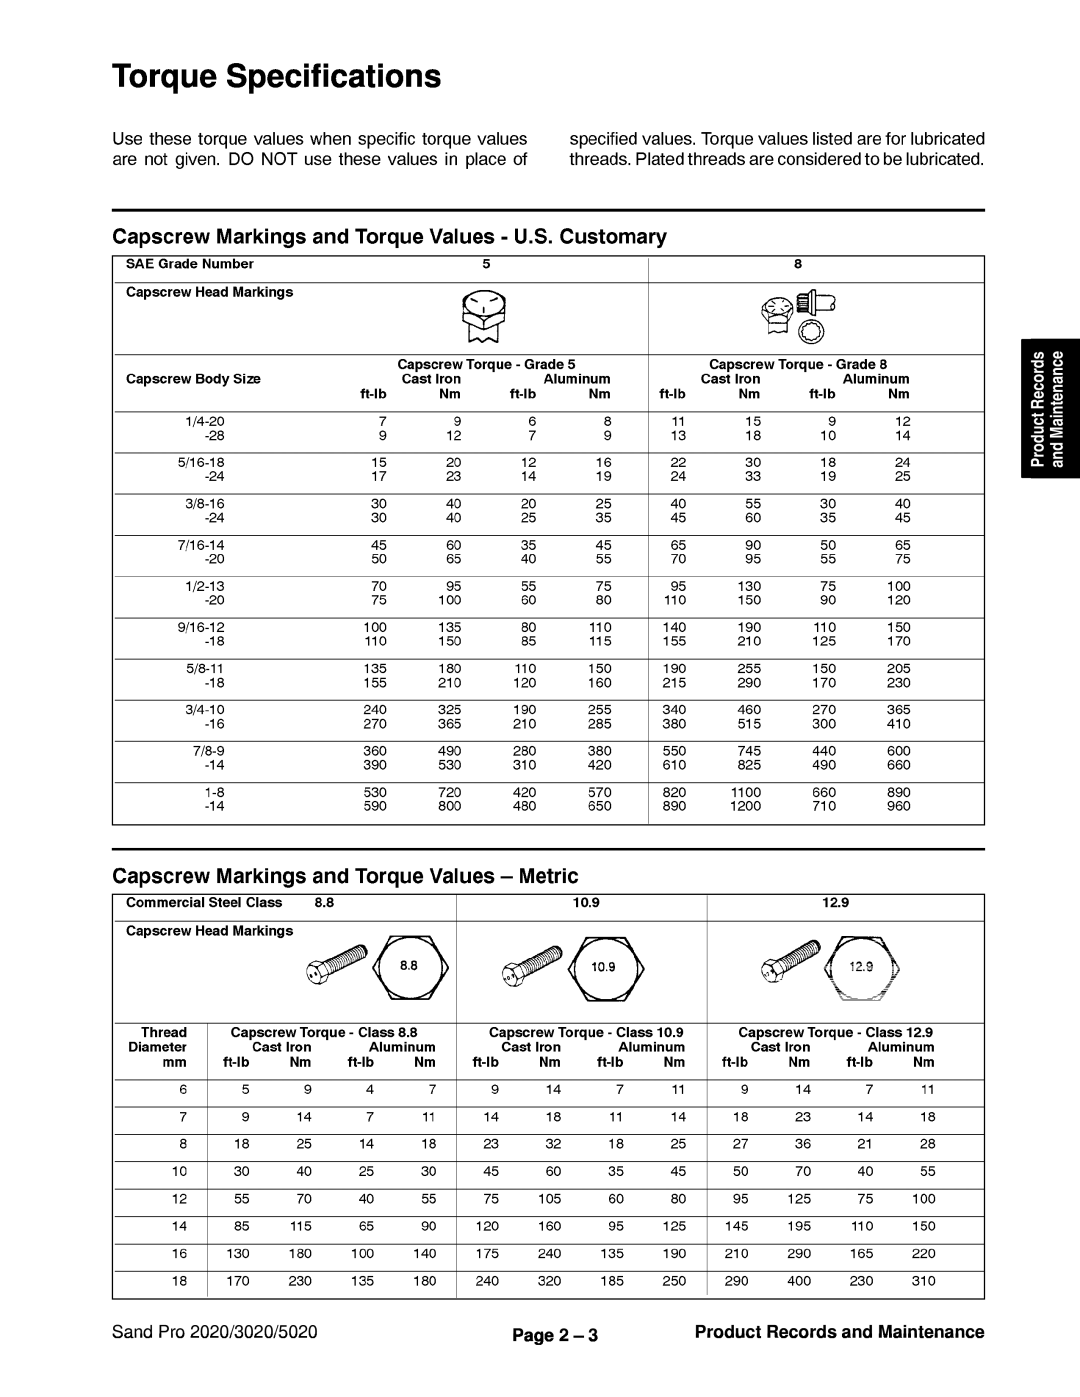 Toro service manual Torque Specifications, Sand Pro 2020/3020/5020, Page 2, Product Records and Maintenance 